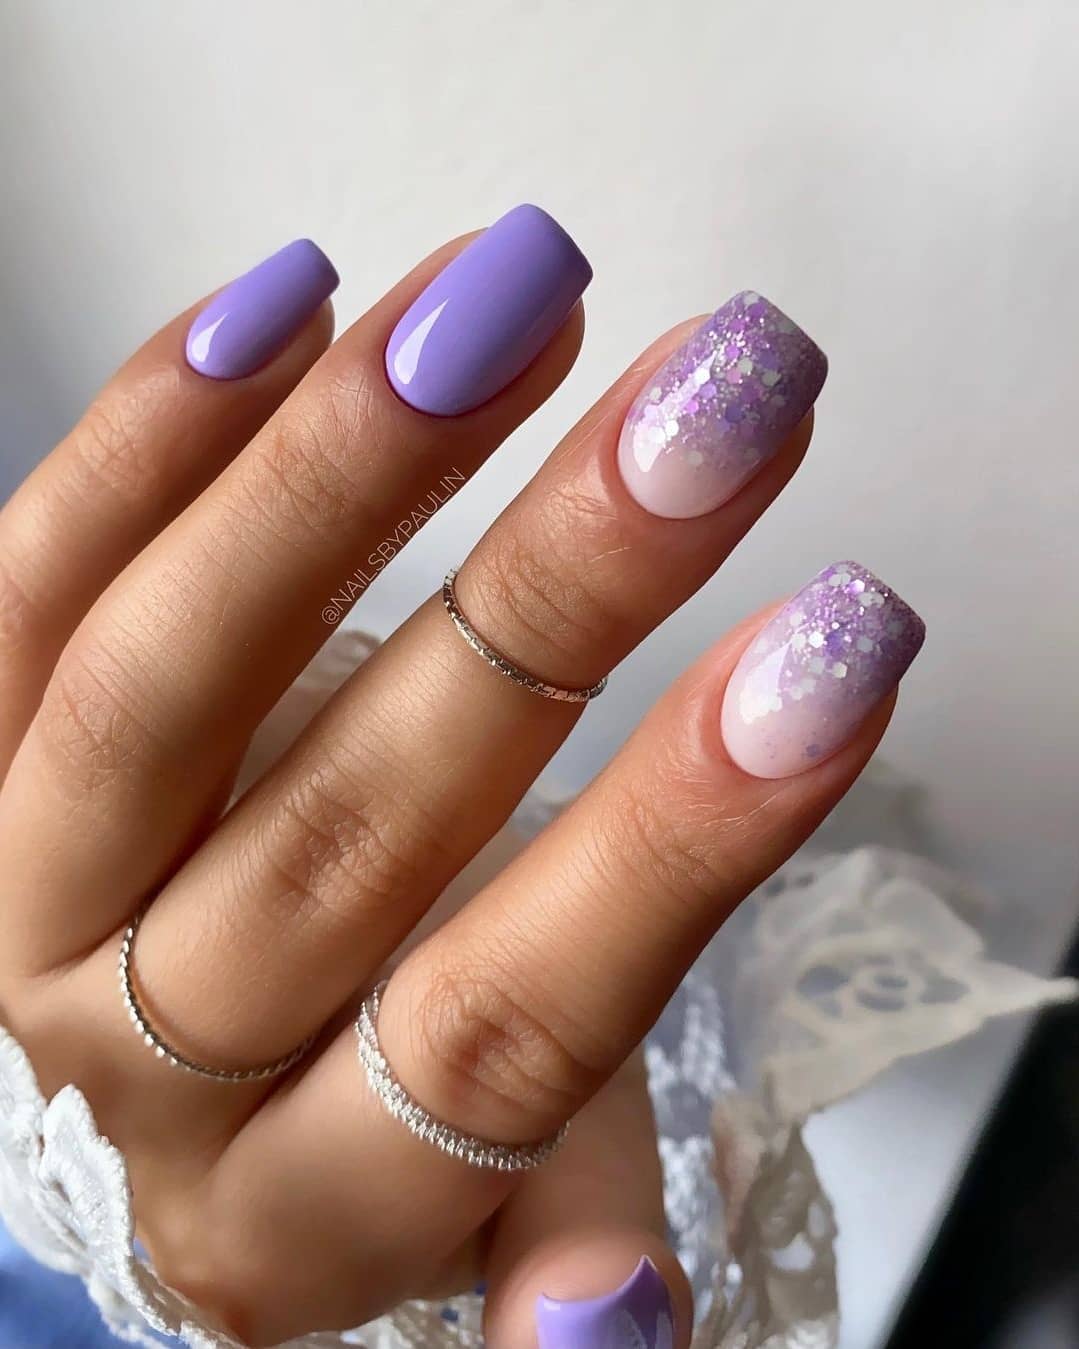 25 Trending Summer Nail Colors And Designs For 2021 images 5